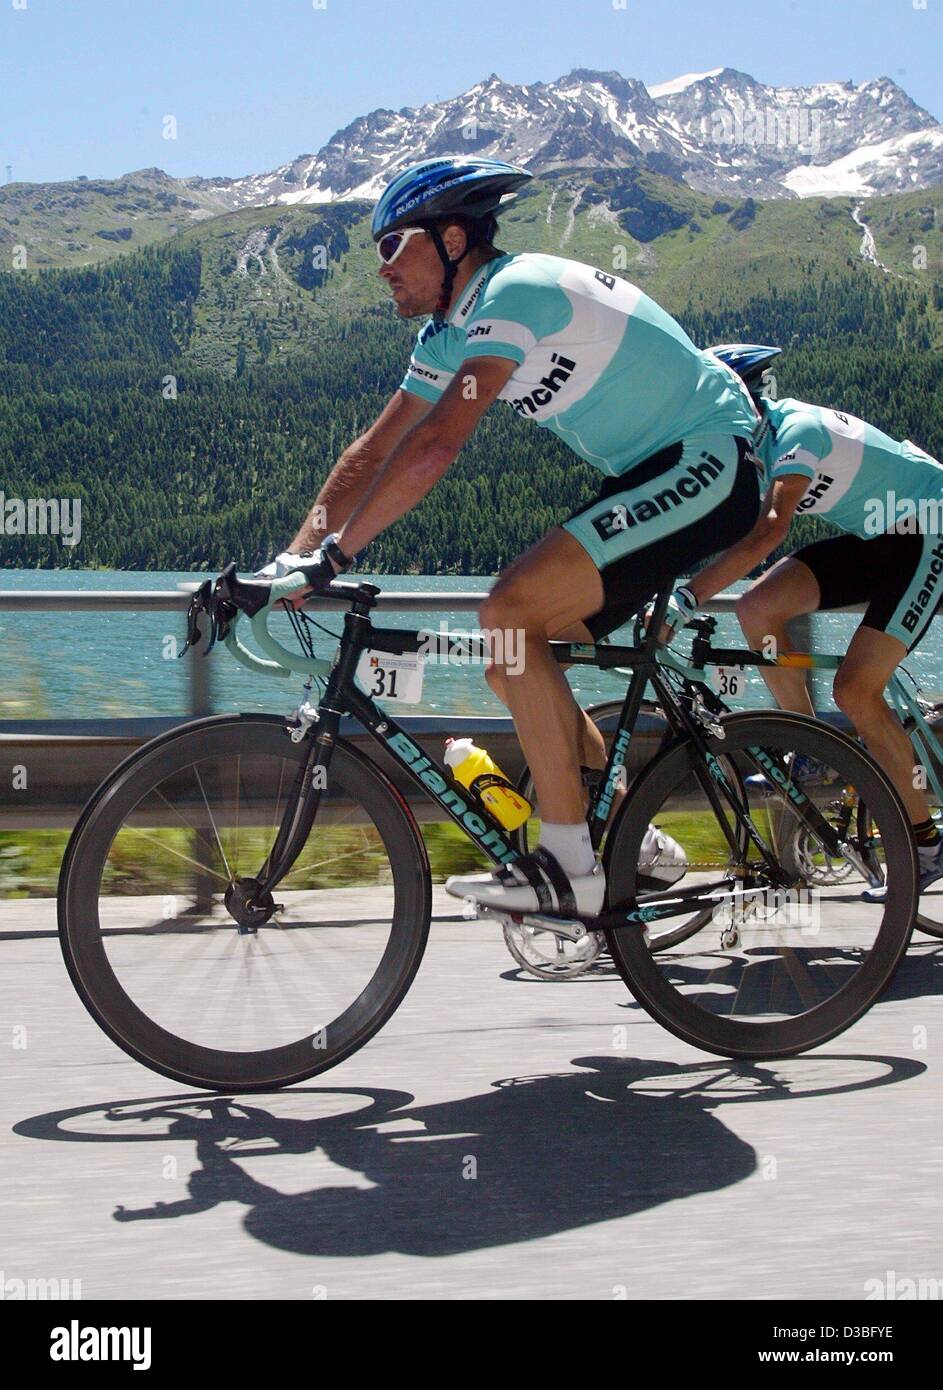 (dpa) - German Olympic winner Jan Ullrich (Team Bianchi) rides along a country road past a scenery with mountains and a lake in the 6th leg during the Tour de Suisse in Silvaplana, Switzerland, 22 June 2003. Ullrich wins second place in the 6th leg which covers a distance of 134 kilometres around Si Stock Photo